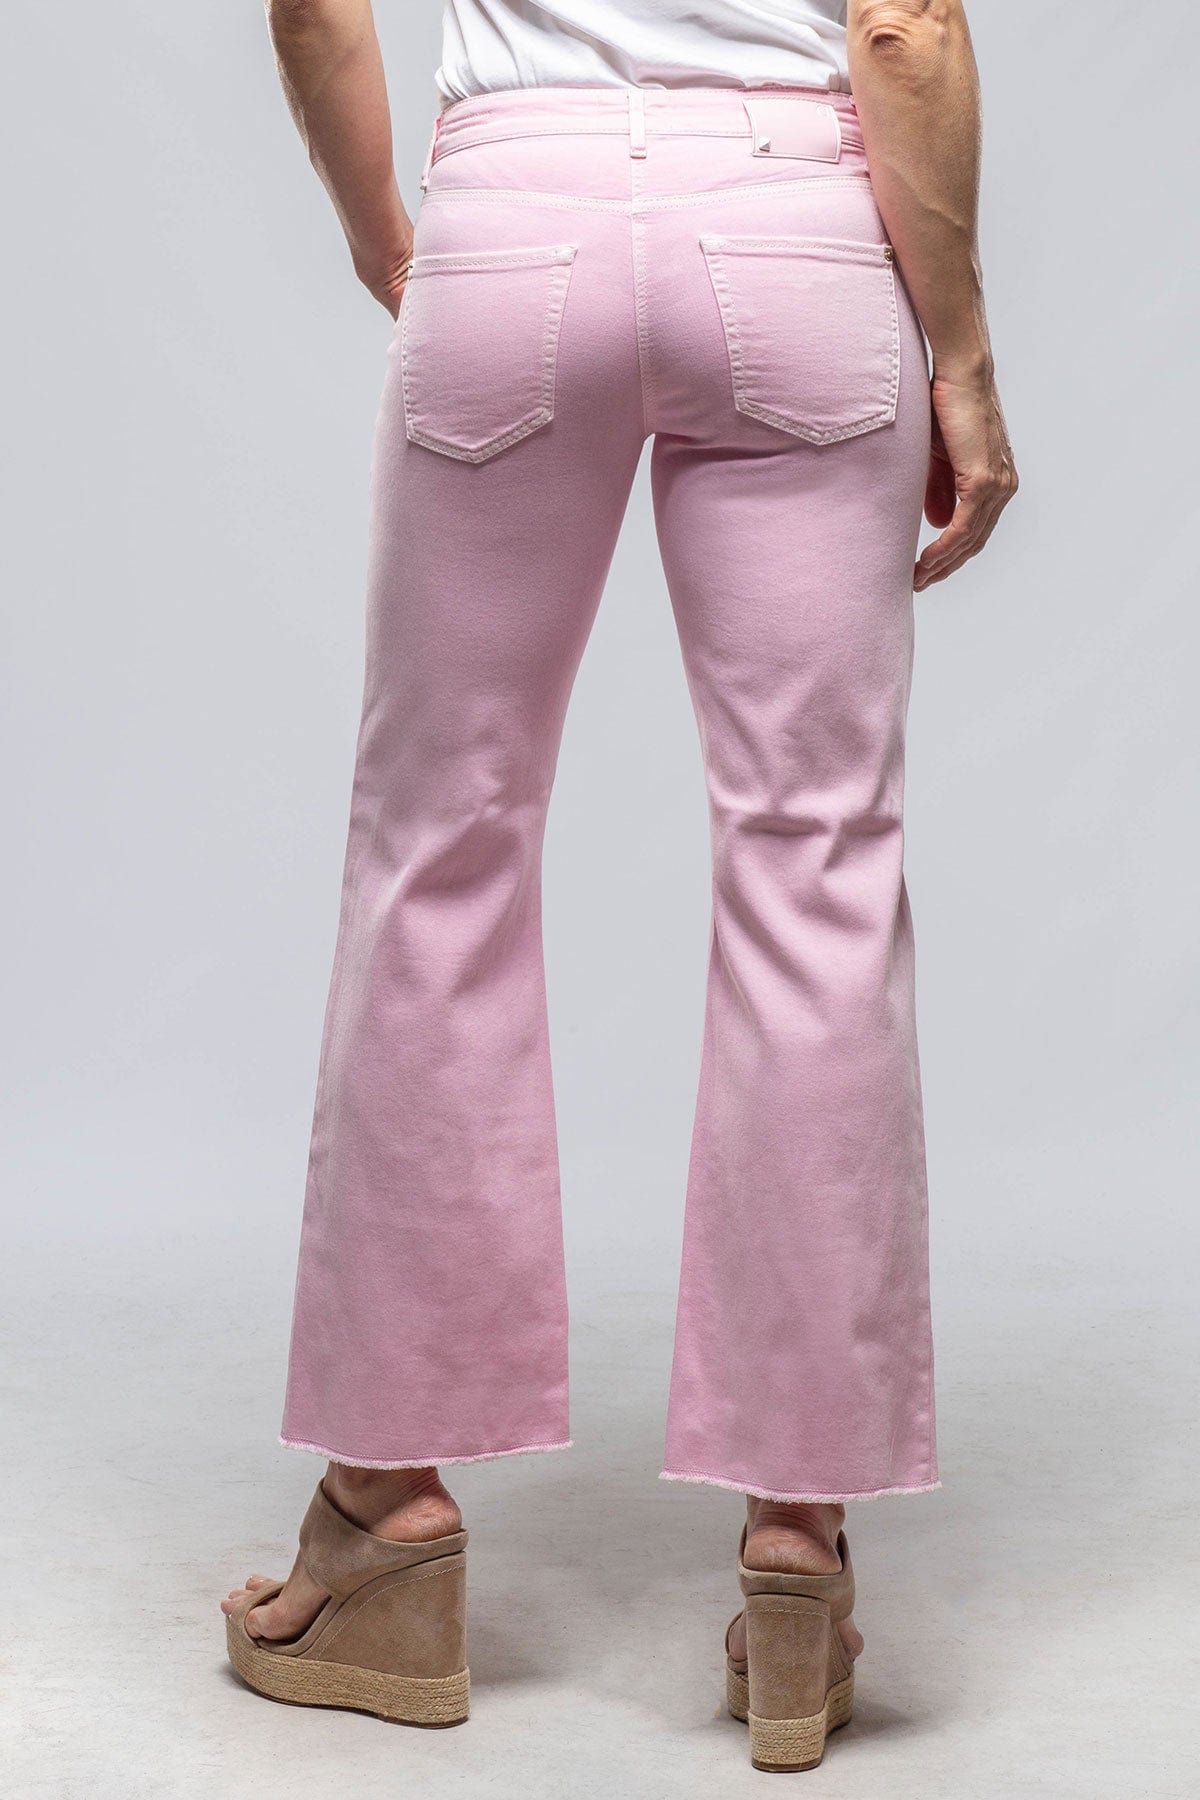 Francesca Cropped Jeans in Light Pink - AXEL'S